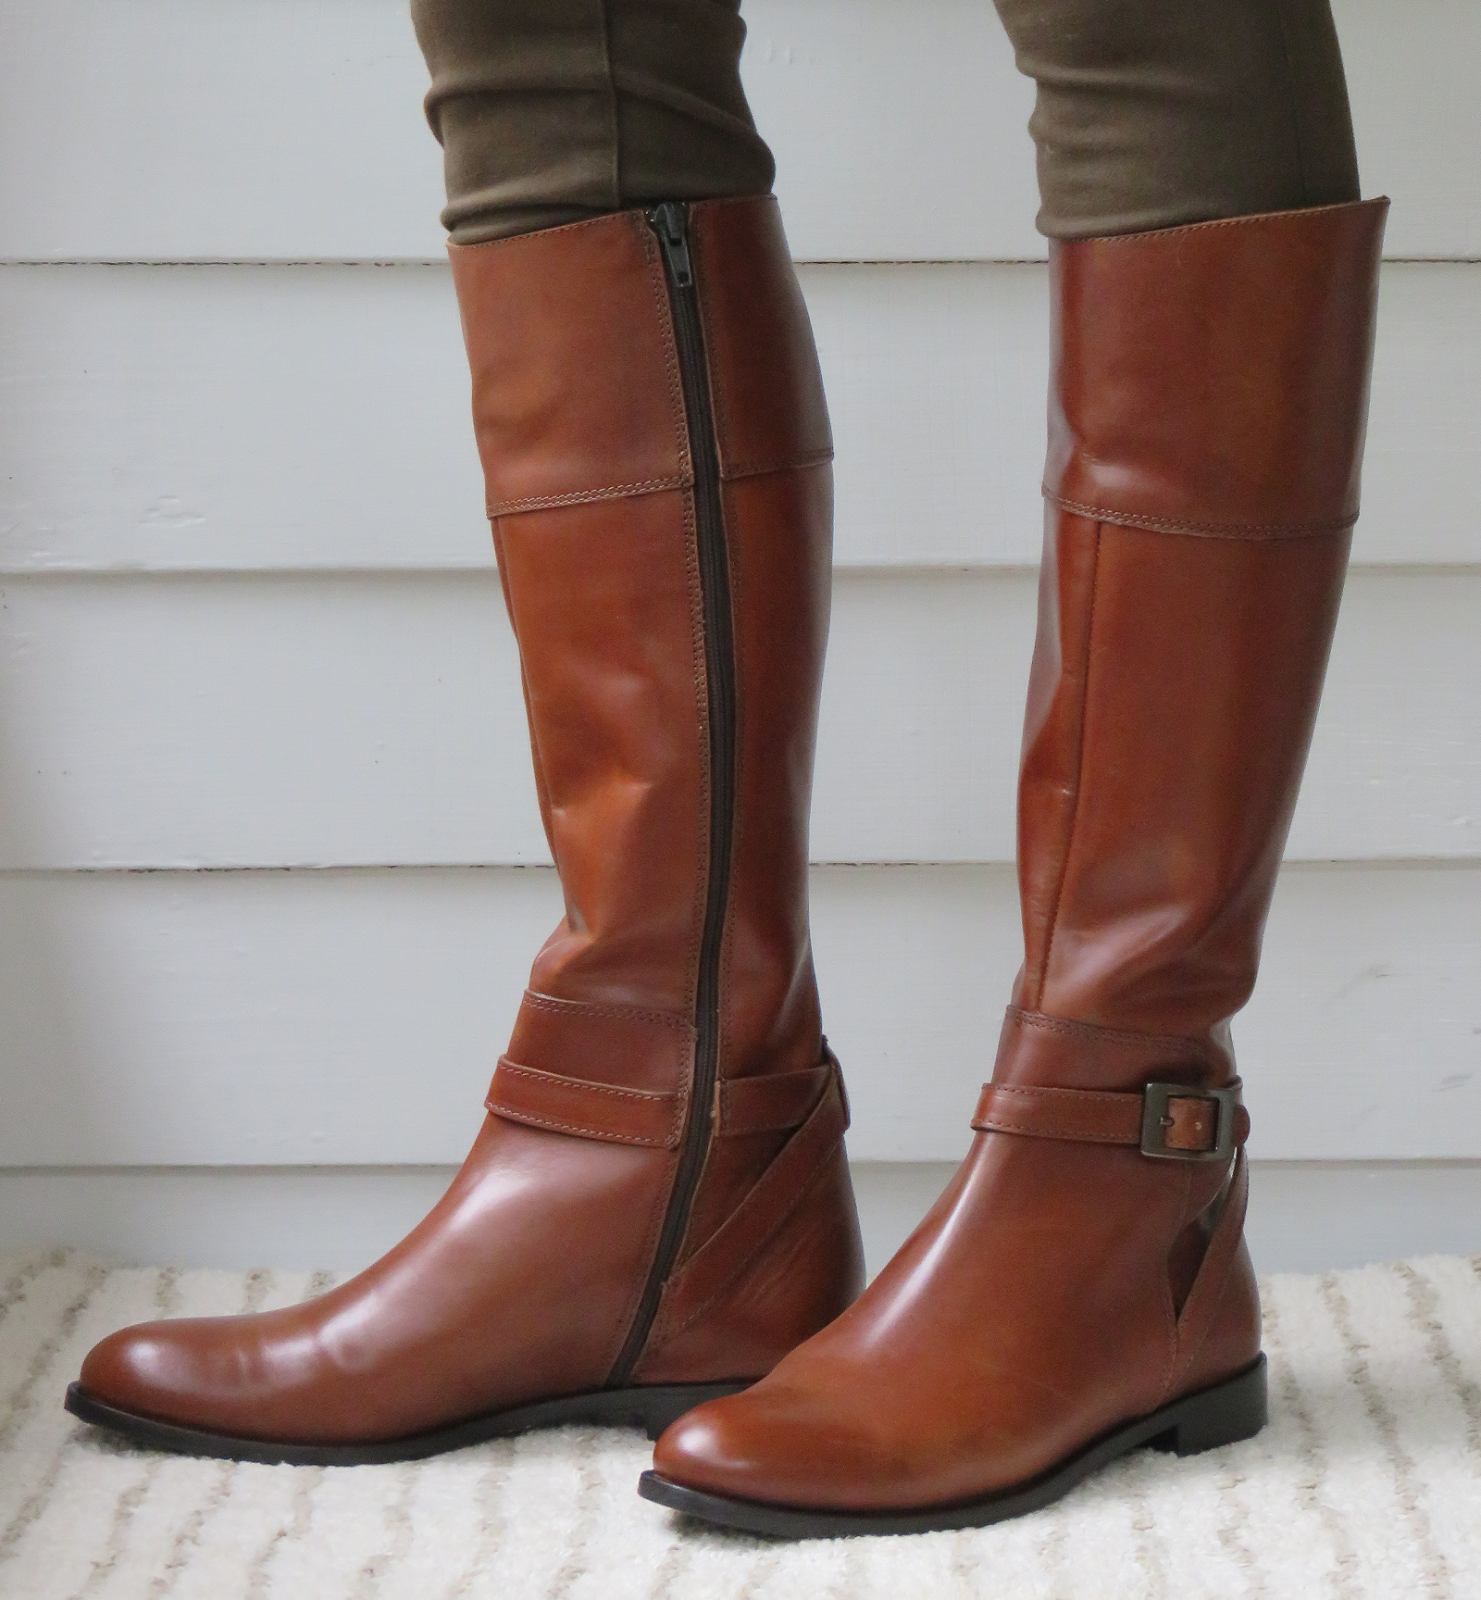 Buy > riding boots skinny calves > in stock